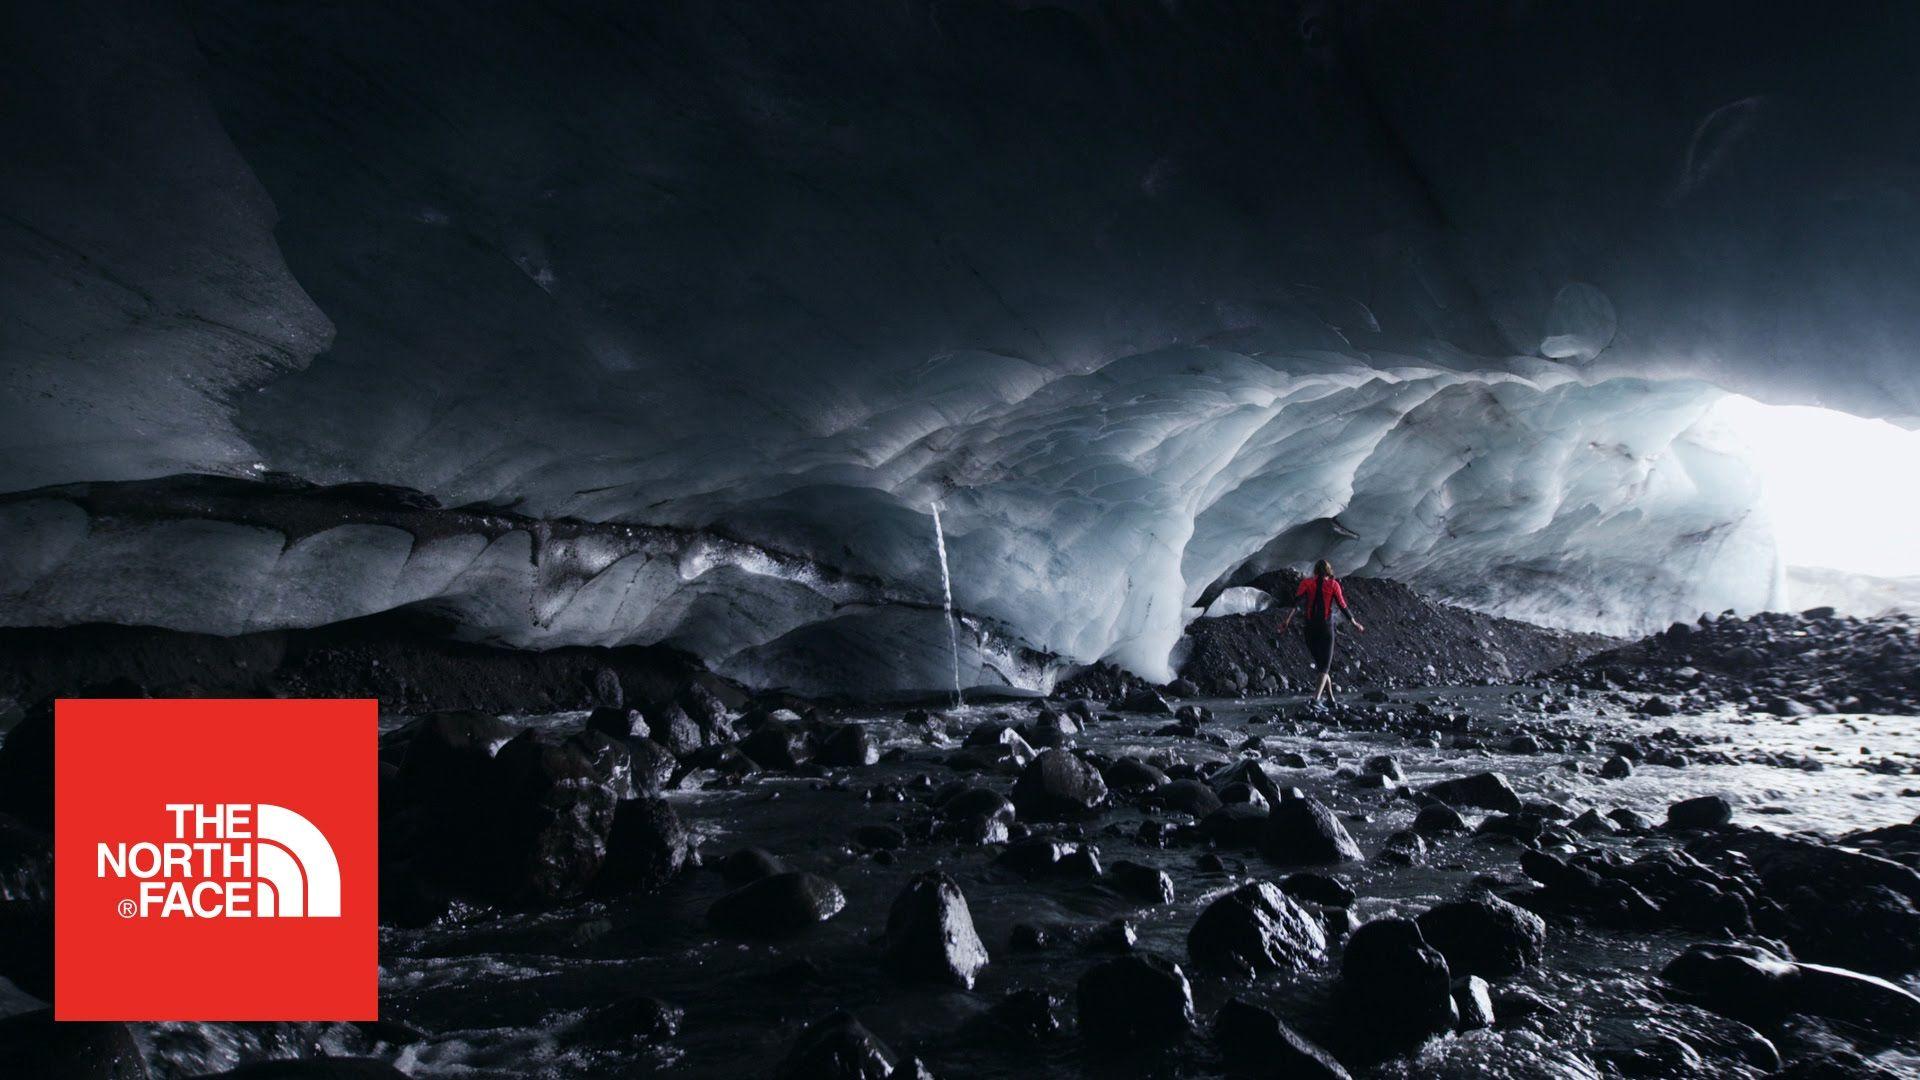 The North Face Wallpapers - Wallpaper Cave